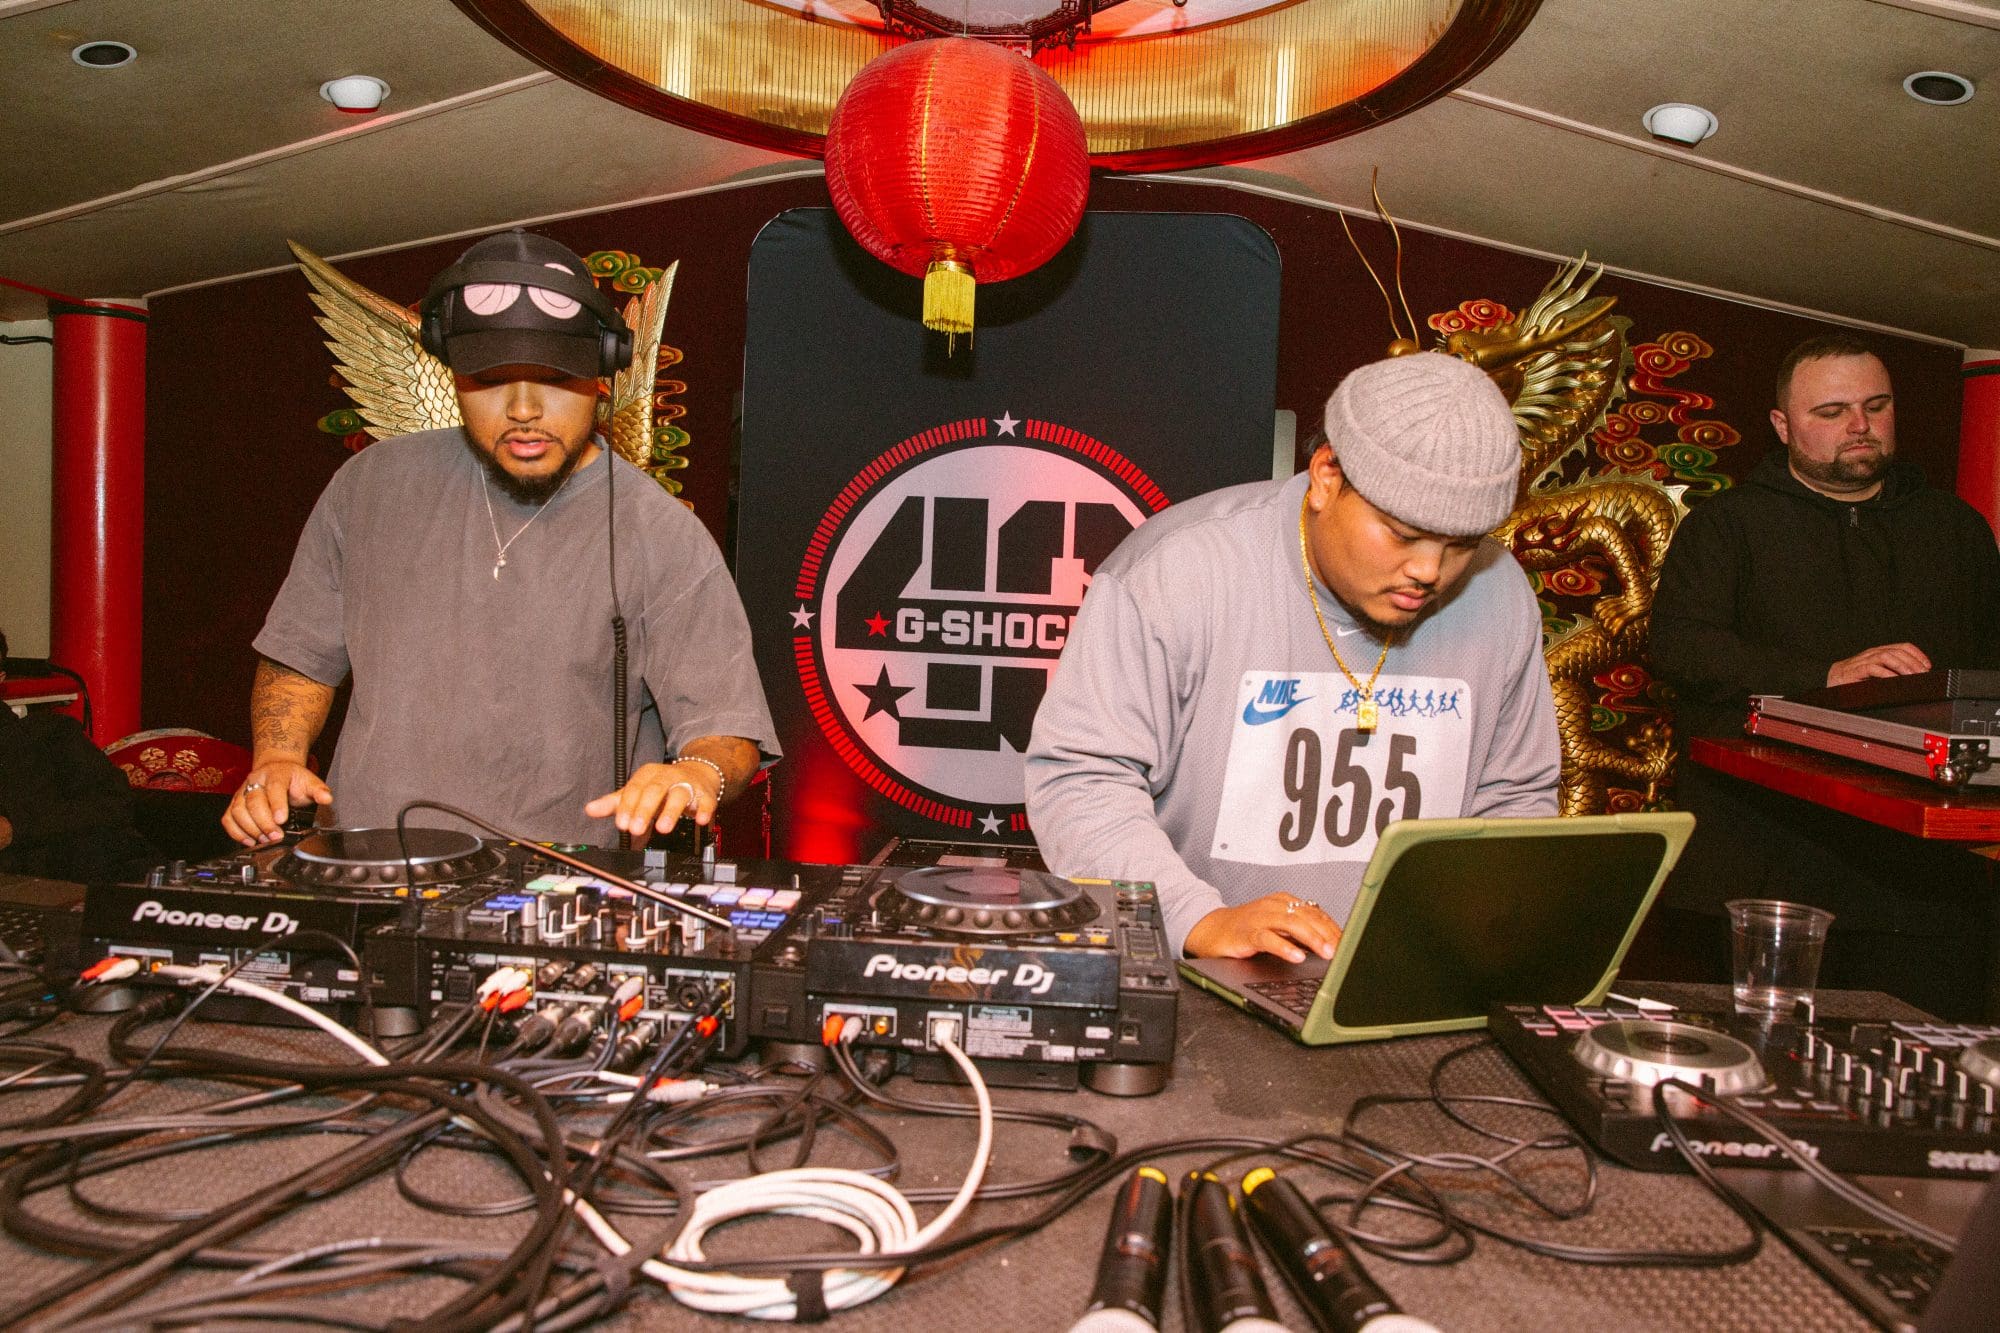 DJ booth of the Bodega x G-SHOCK watch launch party with two DJ's spinning